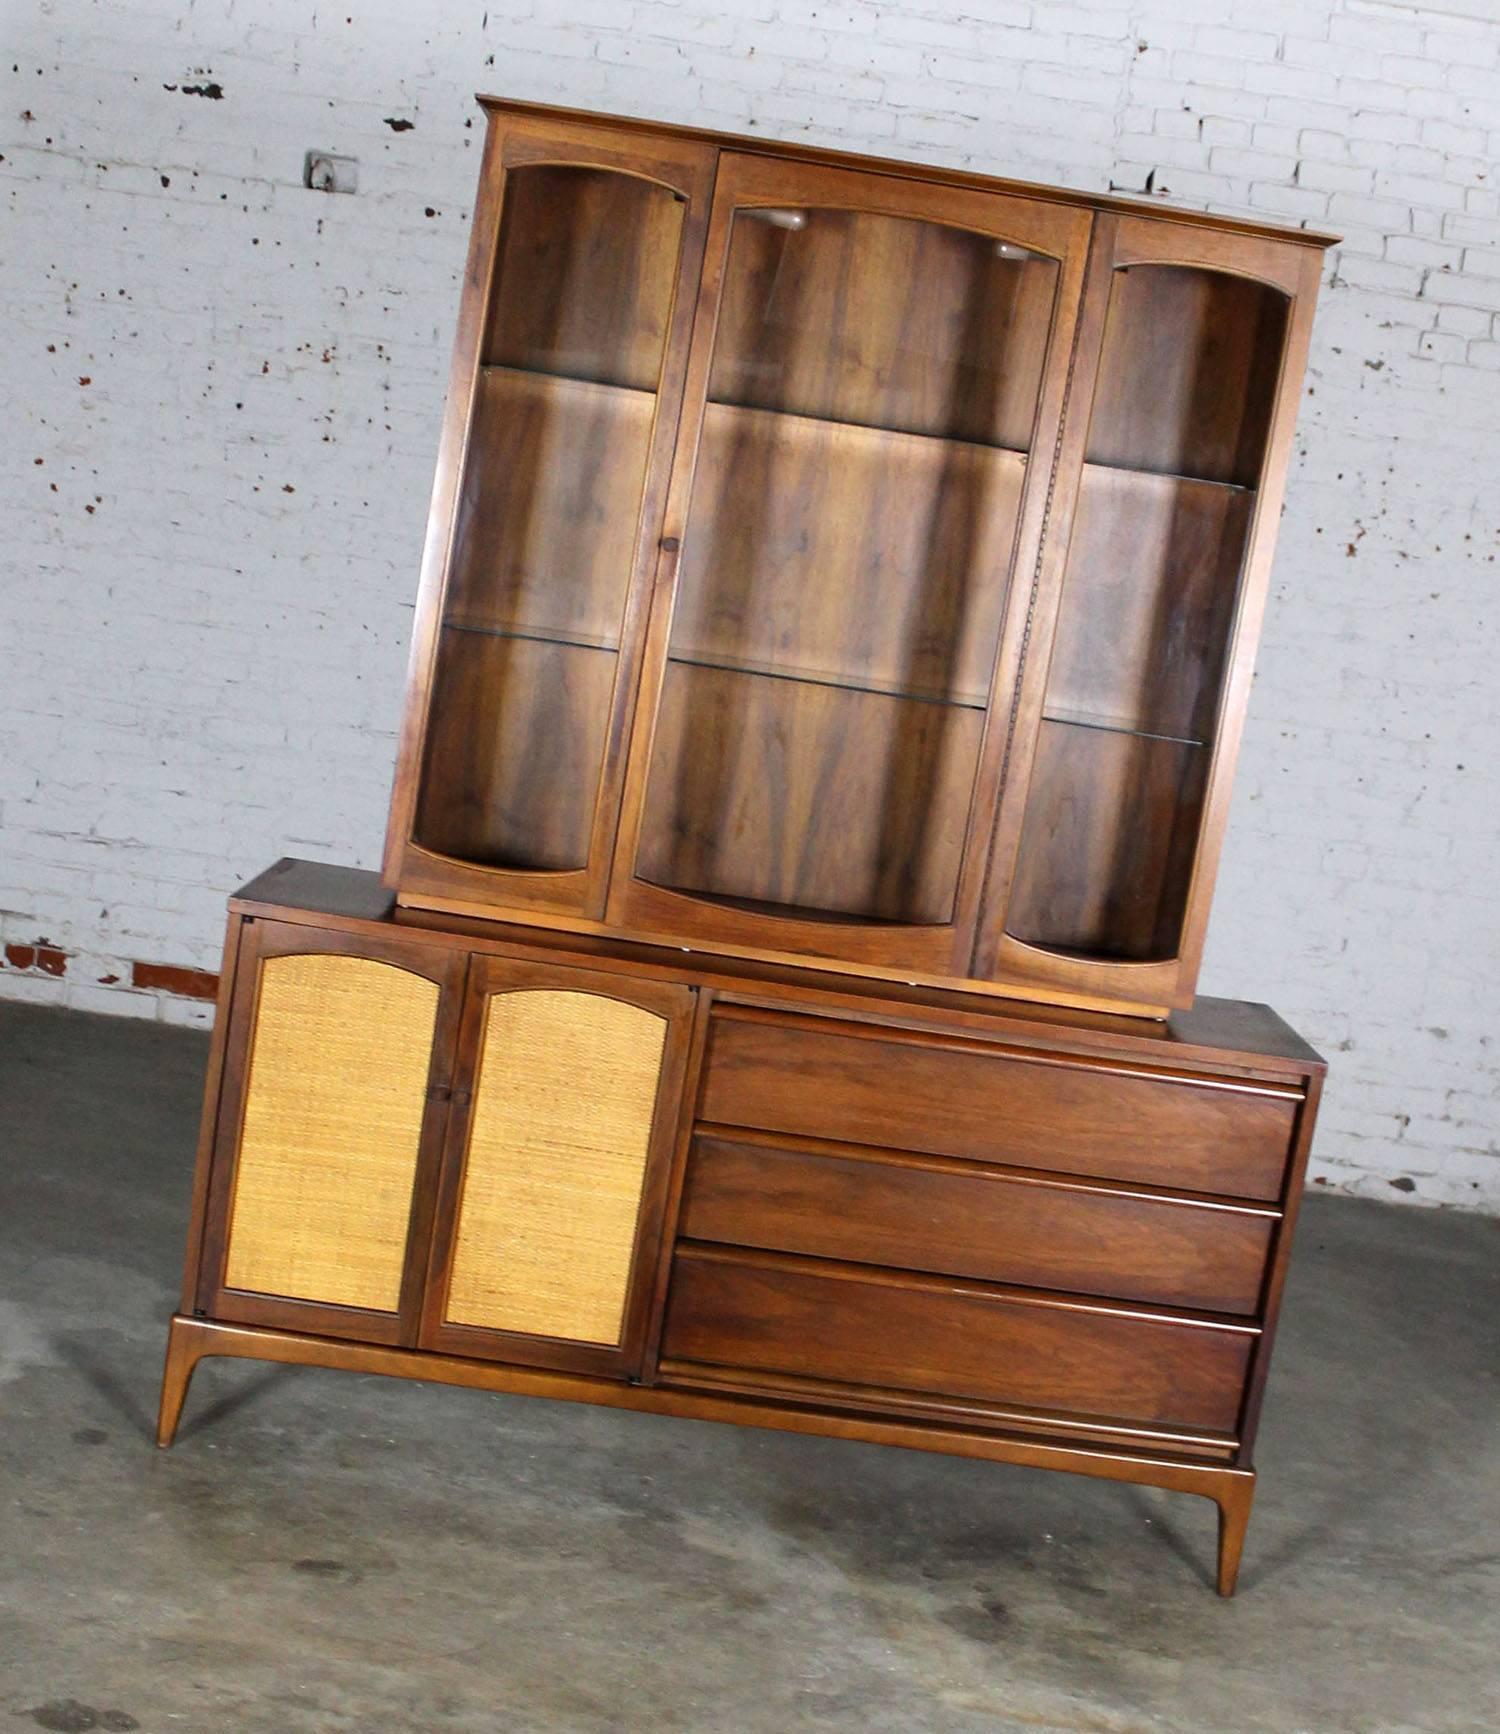 Handsome Mid-Century Modern lighted china display cabinet in two pieces from the Rhythm Collection by Lane. The doors are reversible from cane to walnut. This cabinet is in very fine vintage condition and circa 1960.

This cabinet is one of the